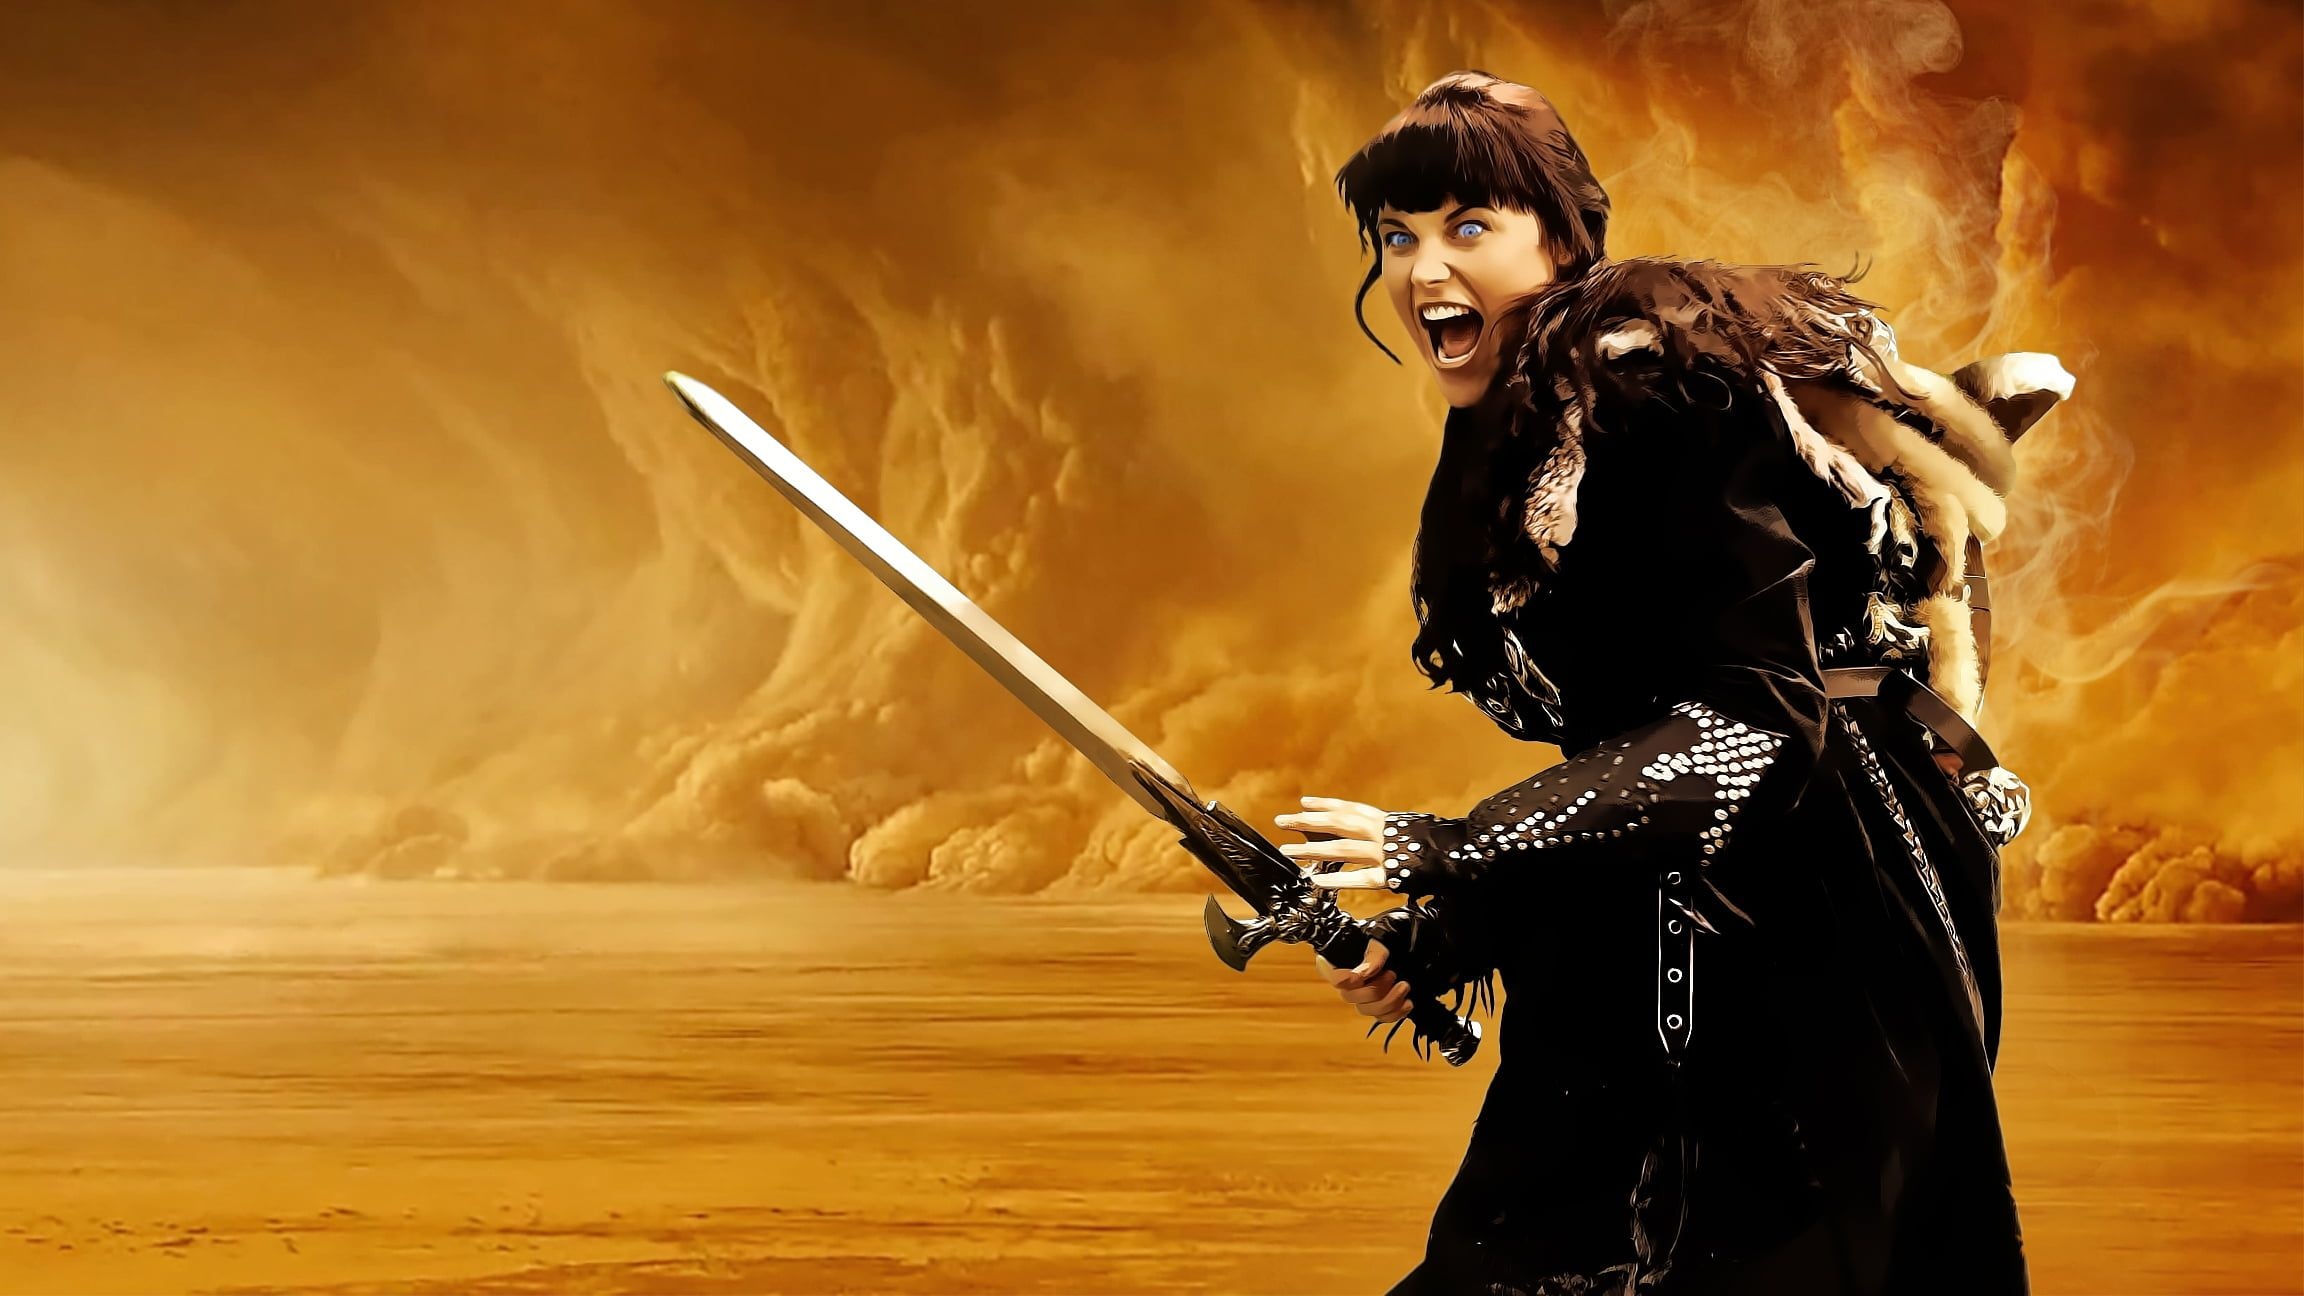 Xena: Warrior Princess (TV Series): The leading character, who shows a great deal of creativity and ingenuity. 2310x1300 HD Wallpaper.